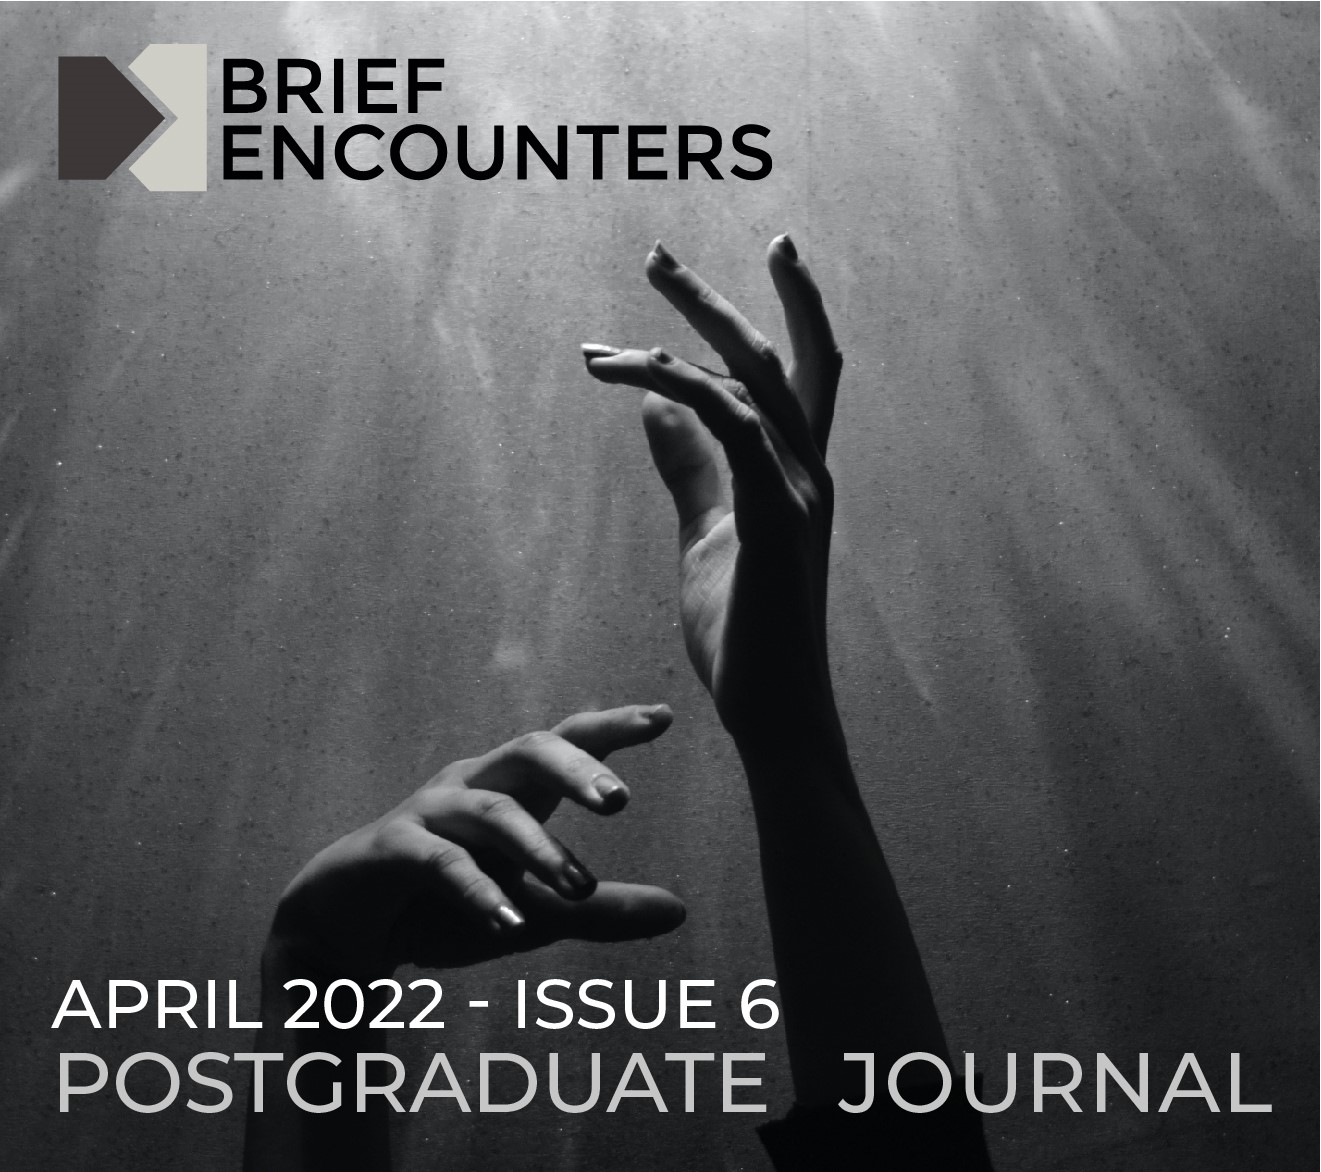 Issue 6 • 2022 • Brief Encounters: Issue 6